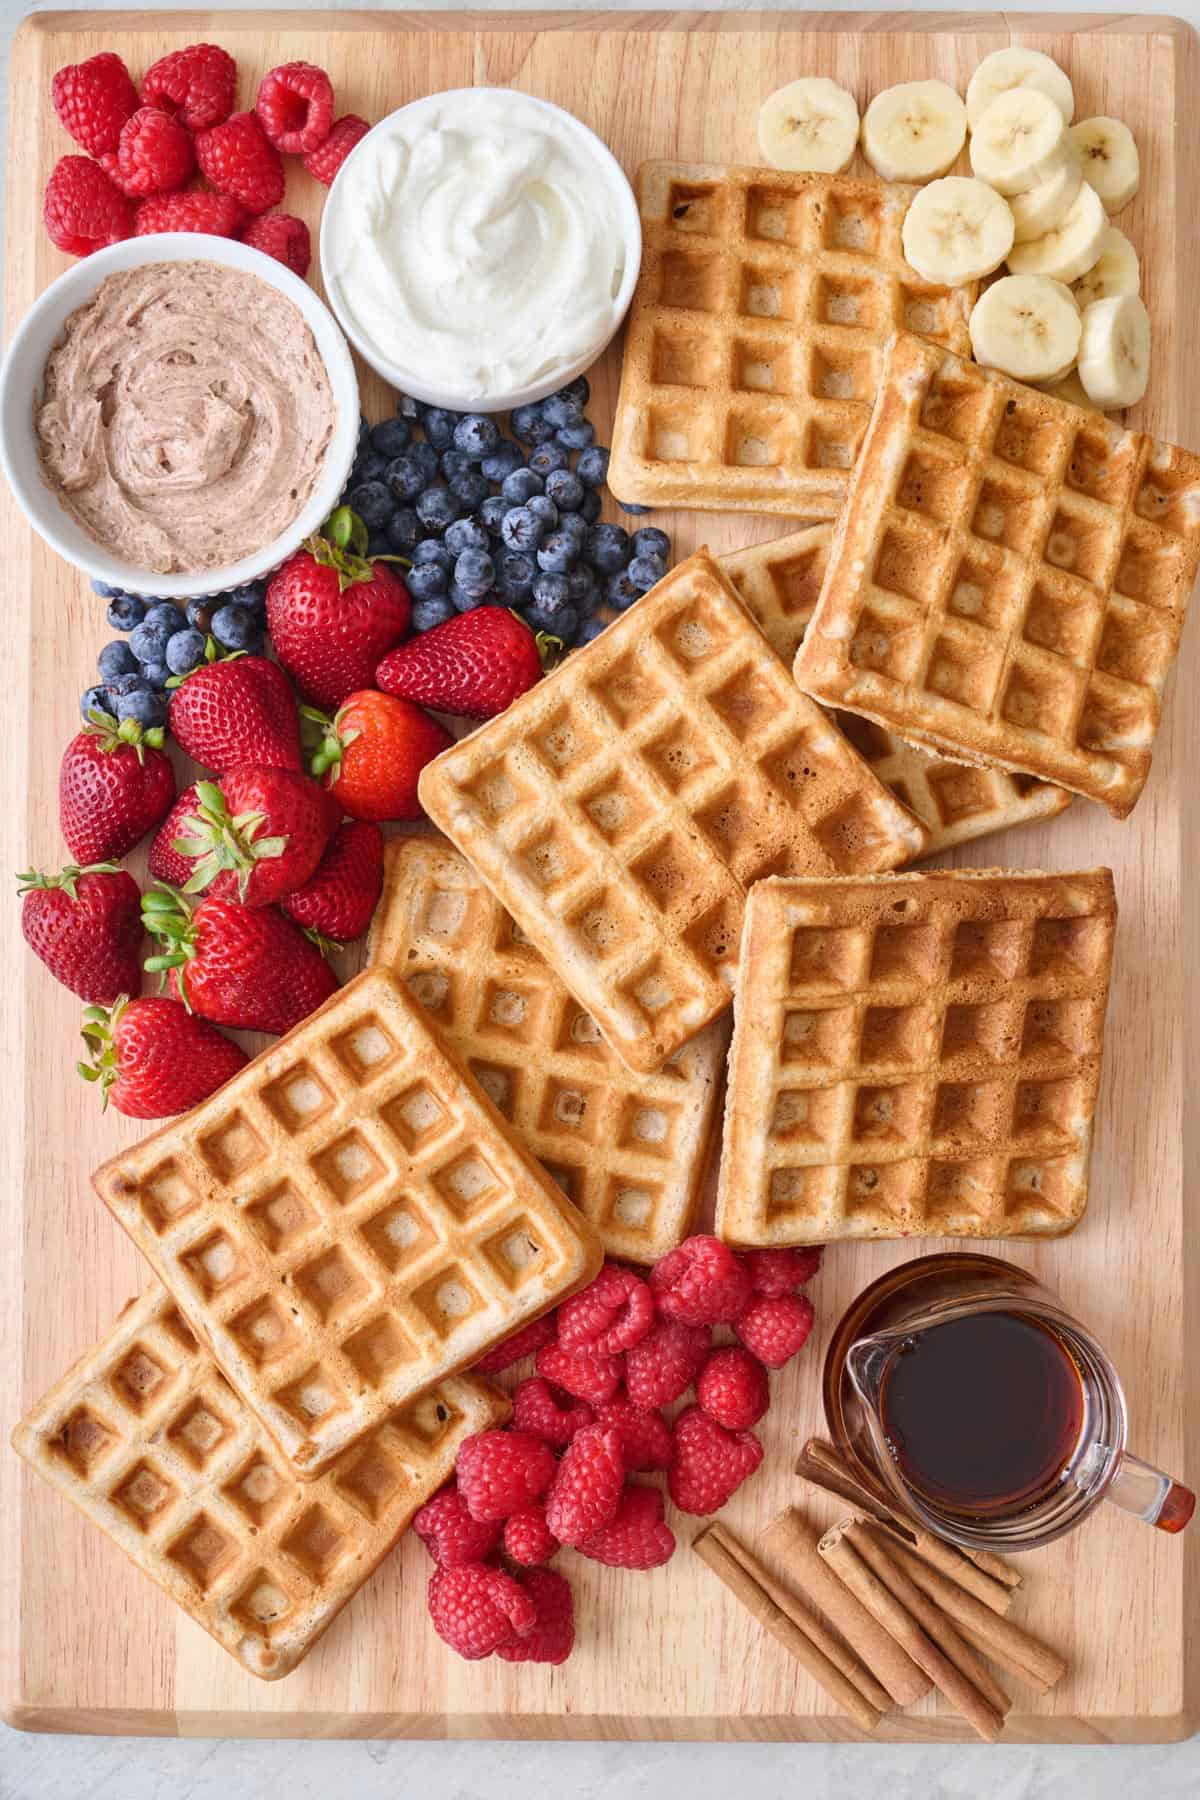 Waffle breakfast board with fresh fruit, whipped cinnamon butter, Greek yogurt, and maple syrup.